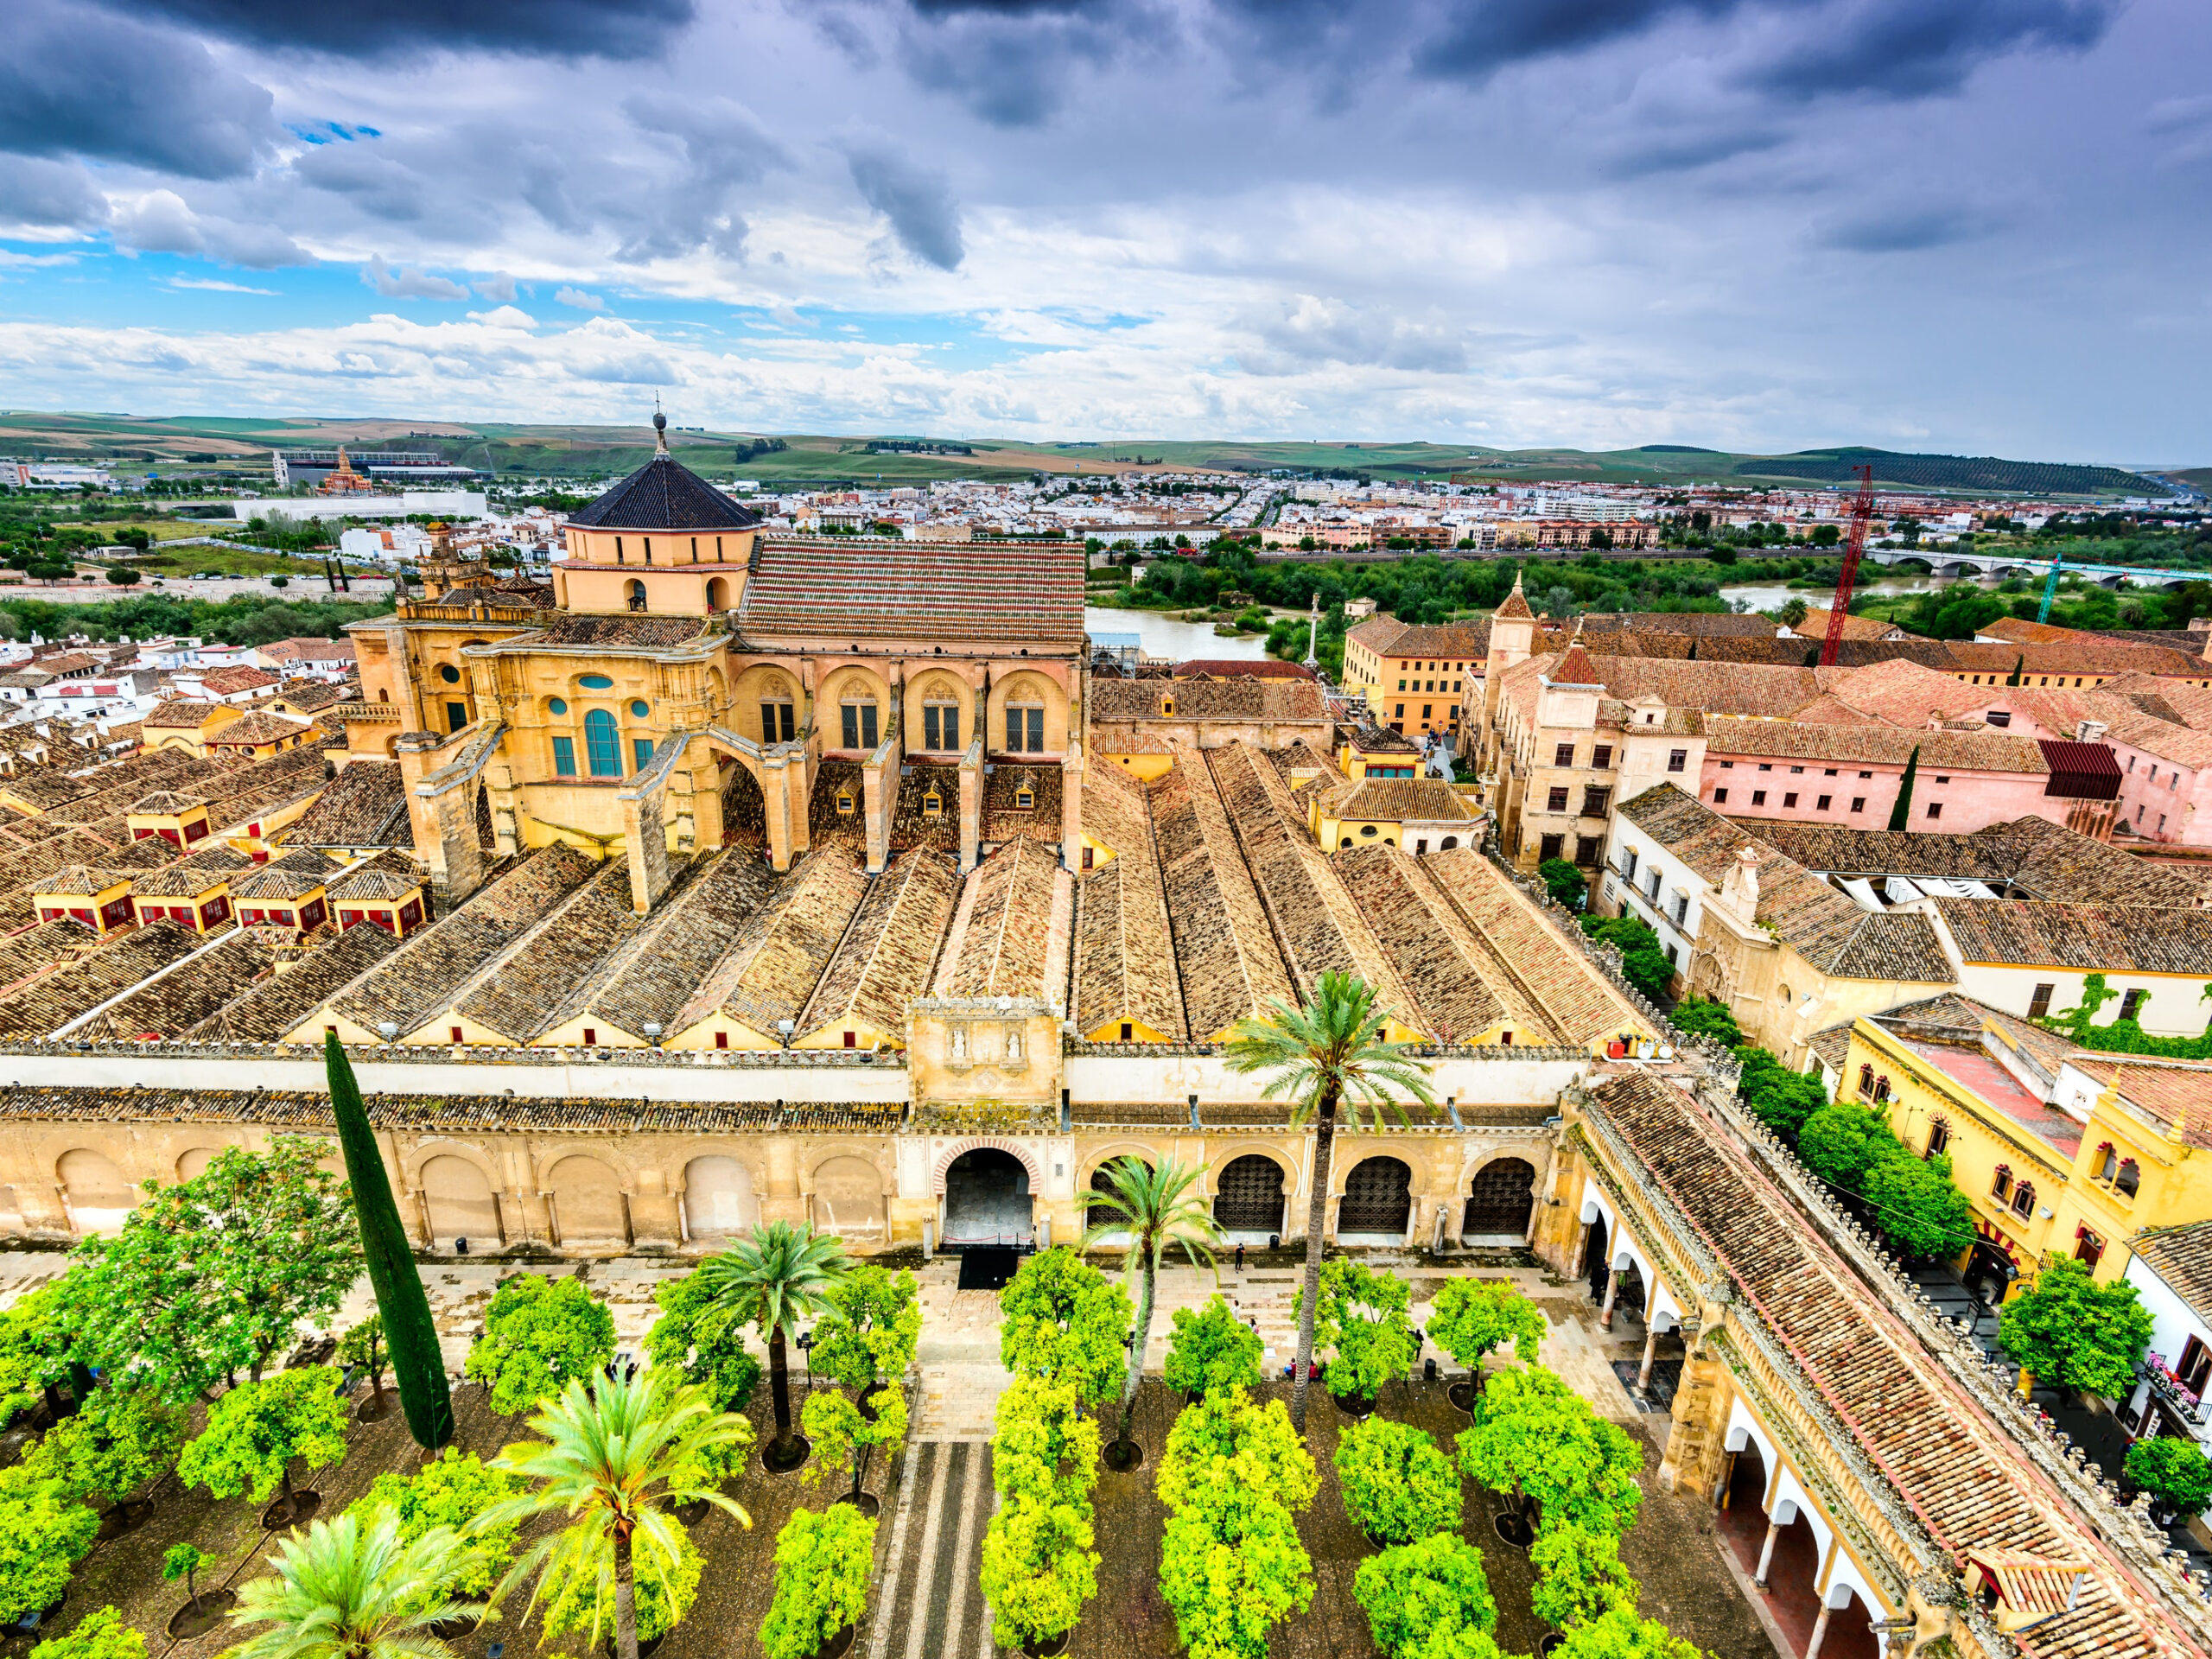 Most popular attractions in Spain - Cordoba